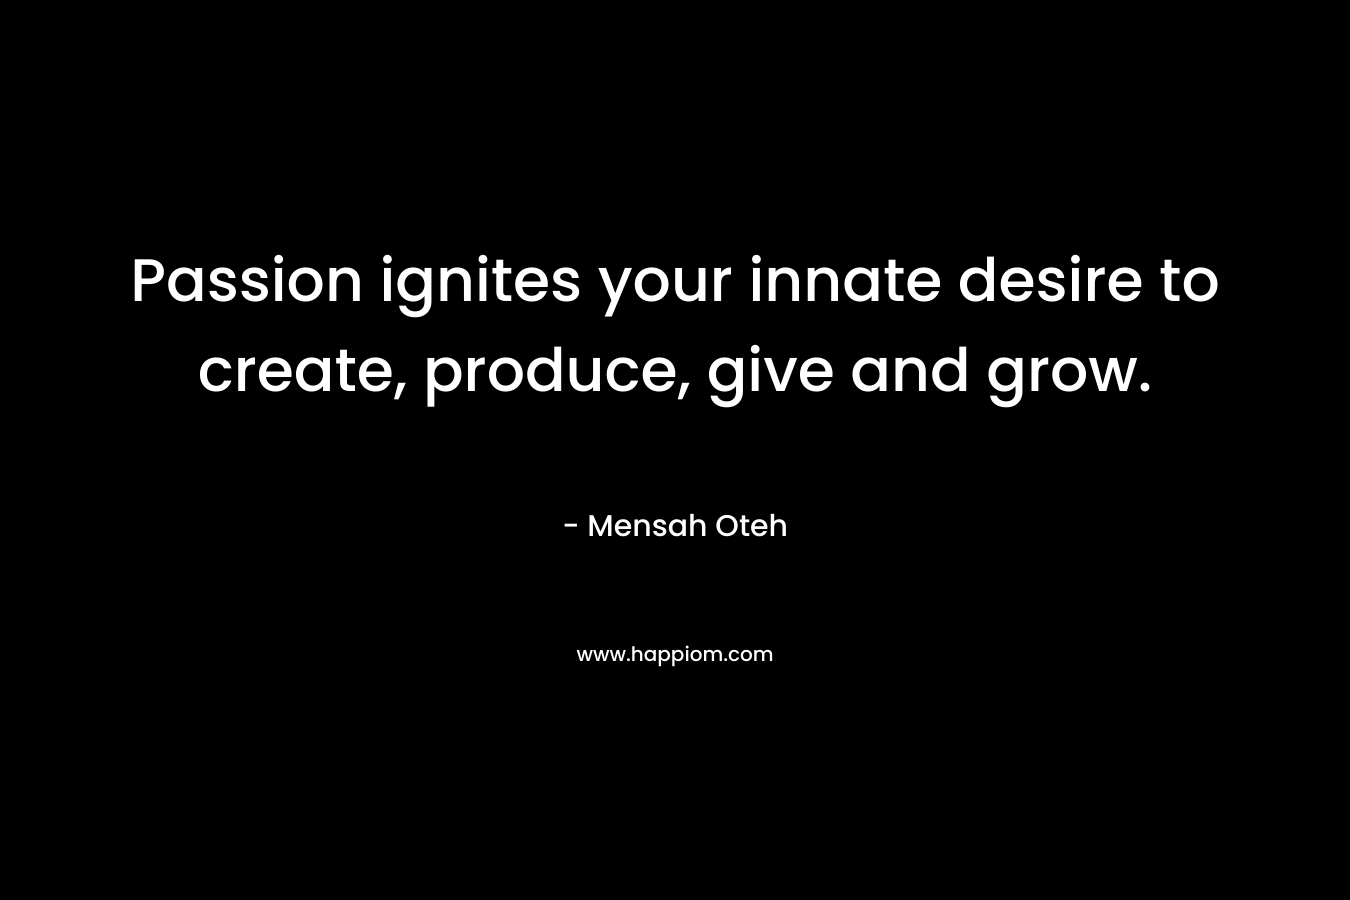 Passion ignites your innate desire to create, produce, give and grow.